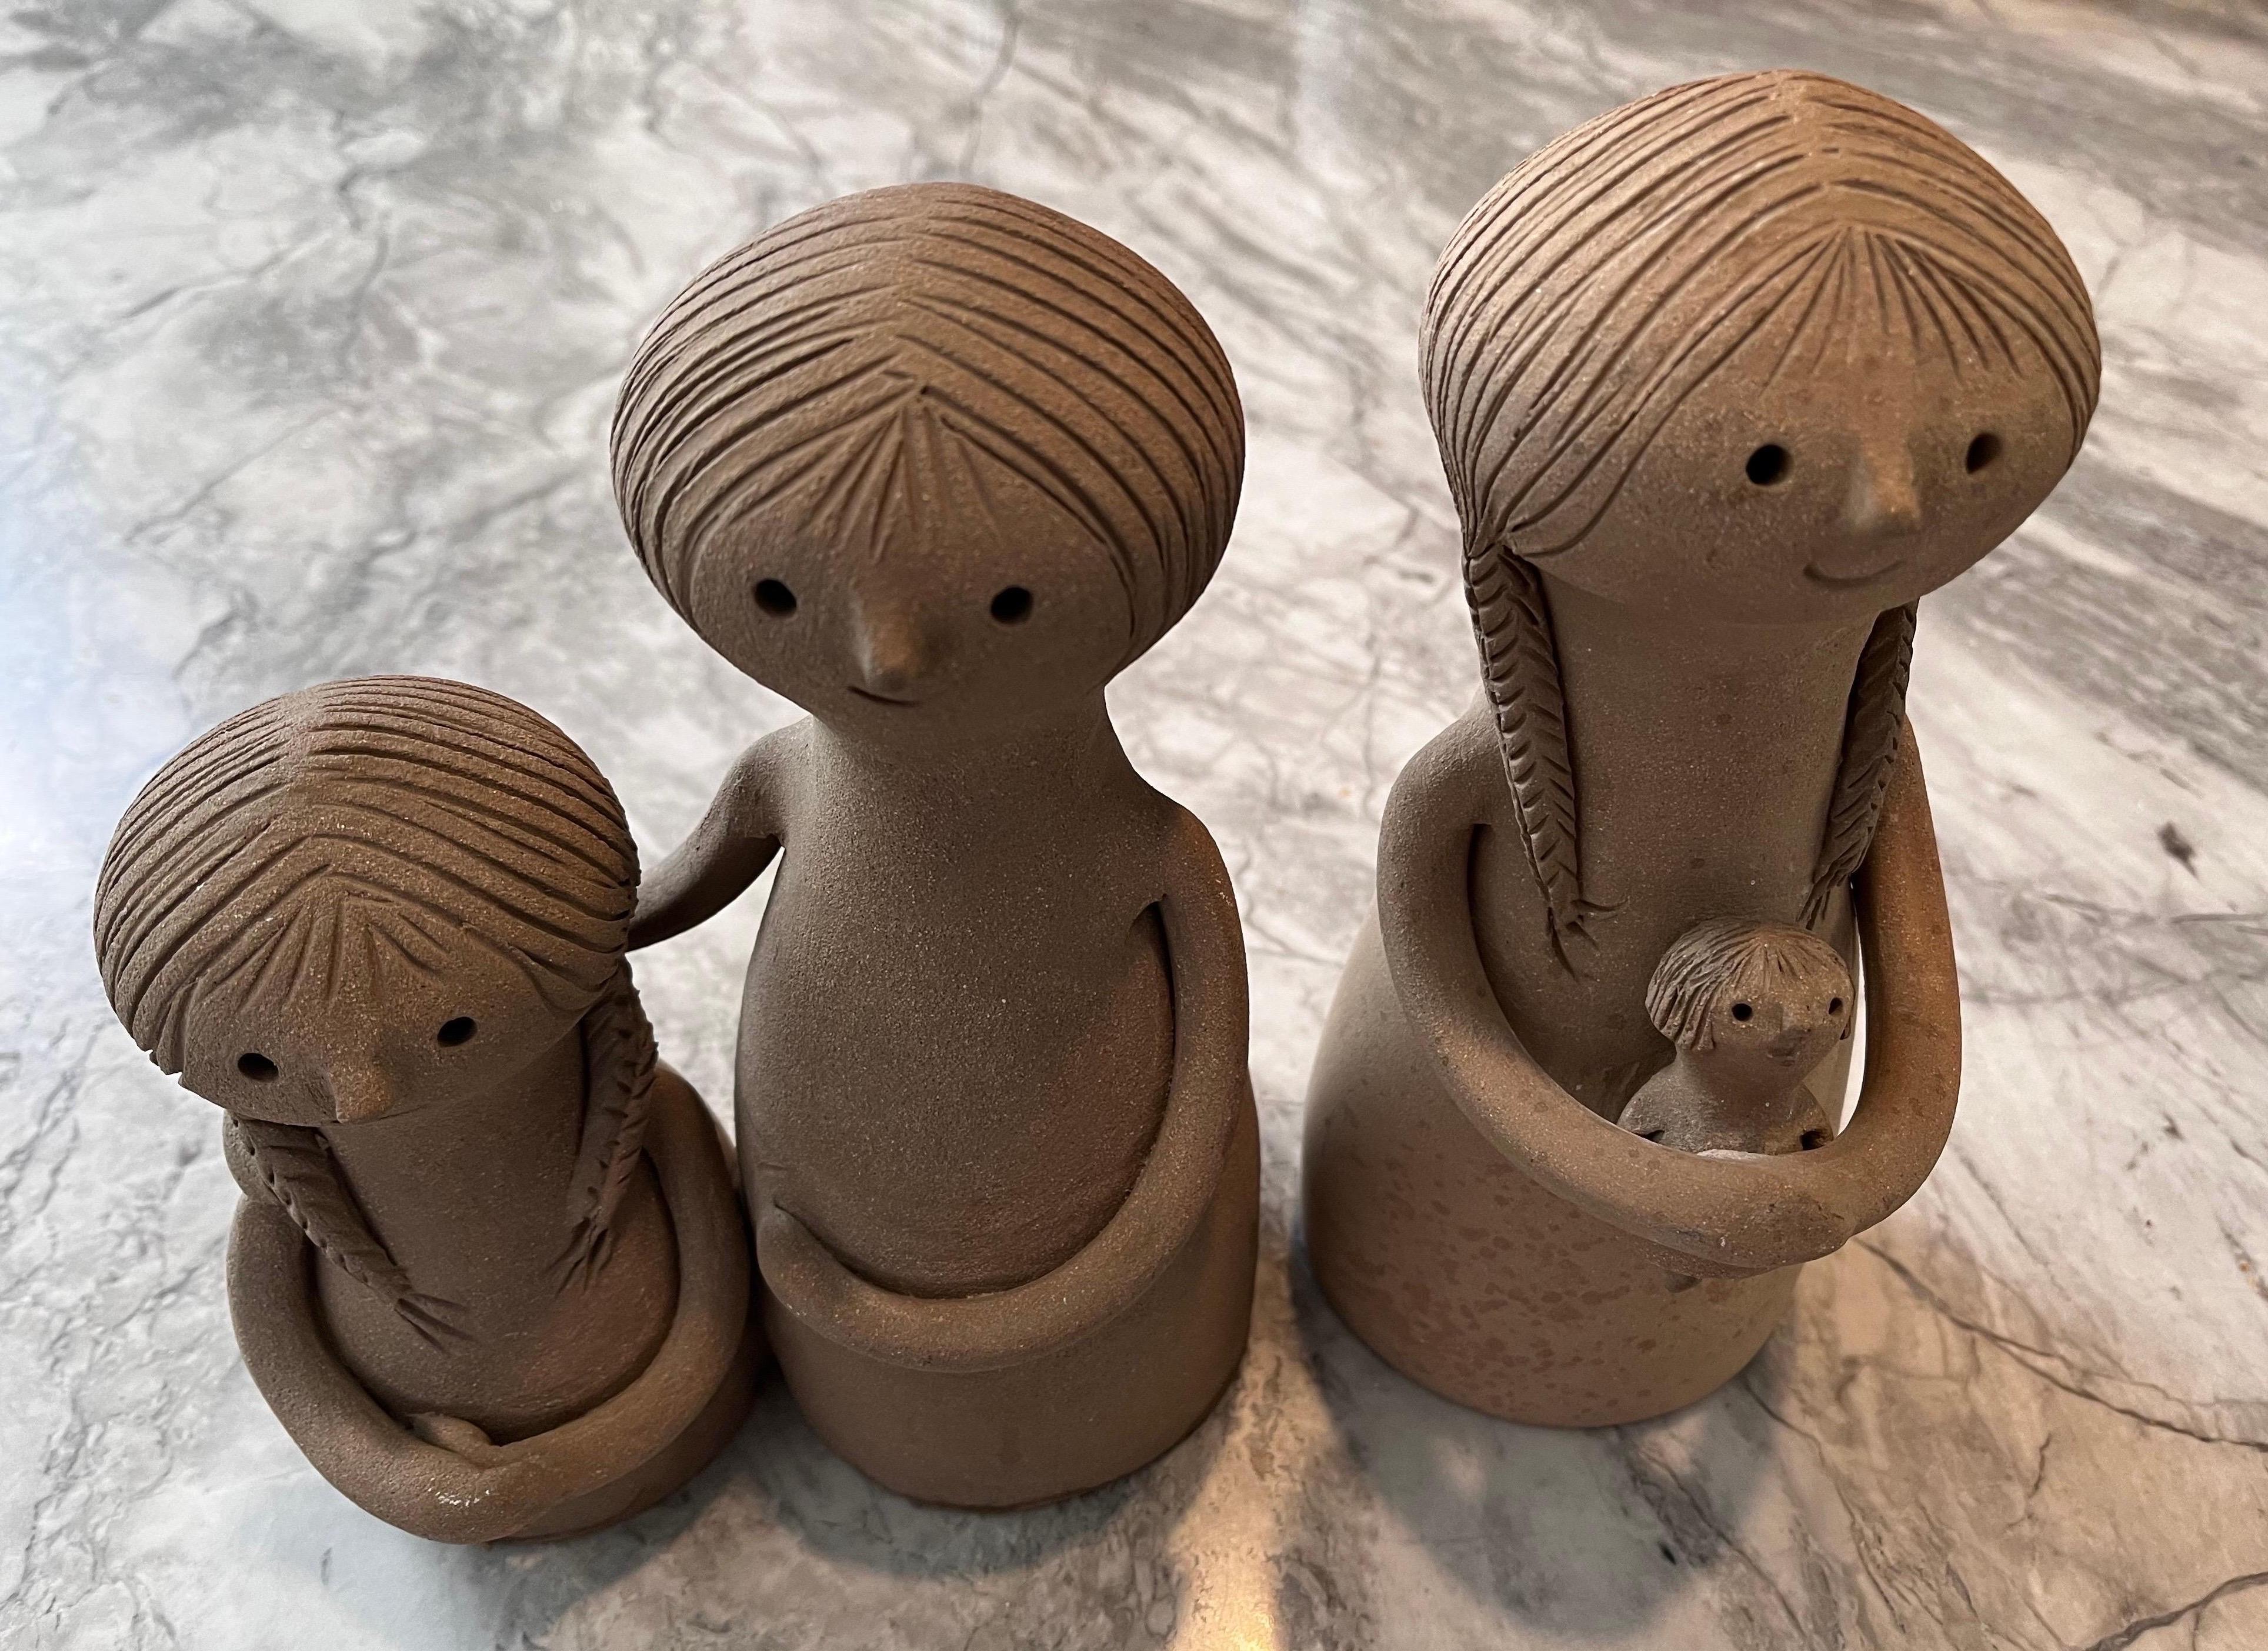 Vintage Rosemary Taylor pottery circa the 1970's. First piece is a Mother holding a Child....2nd is Mother attached to a young girl.
(2) separate pieces - (3) figures
Very Cute - with add some charm to any room.